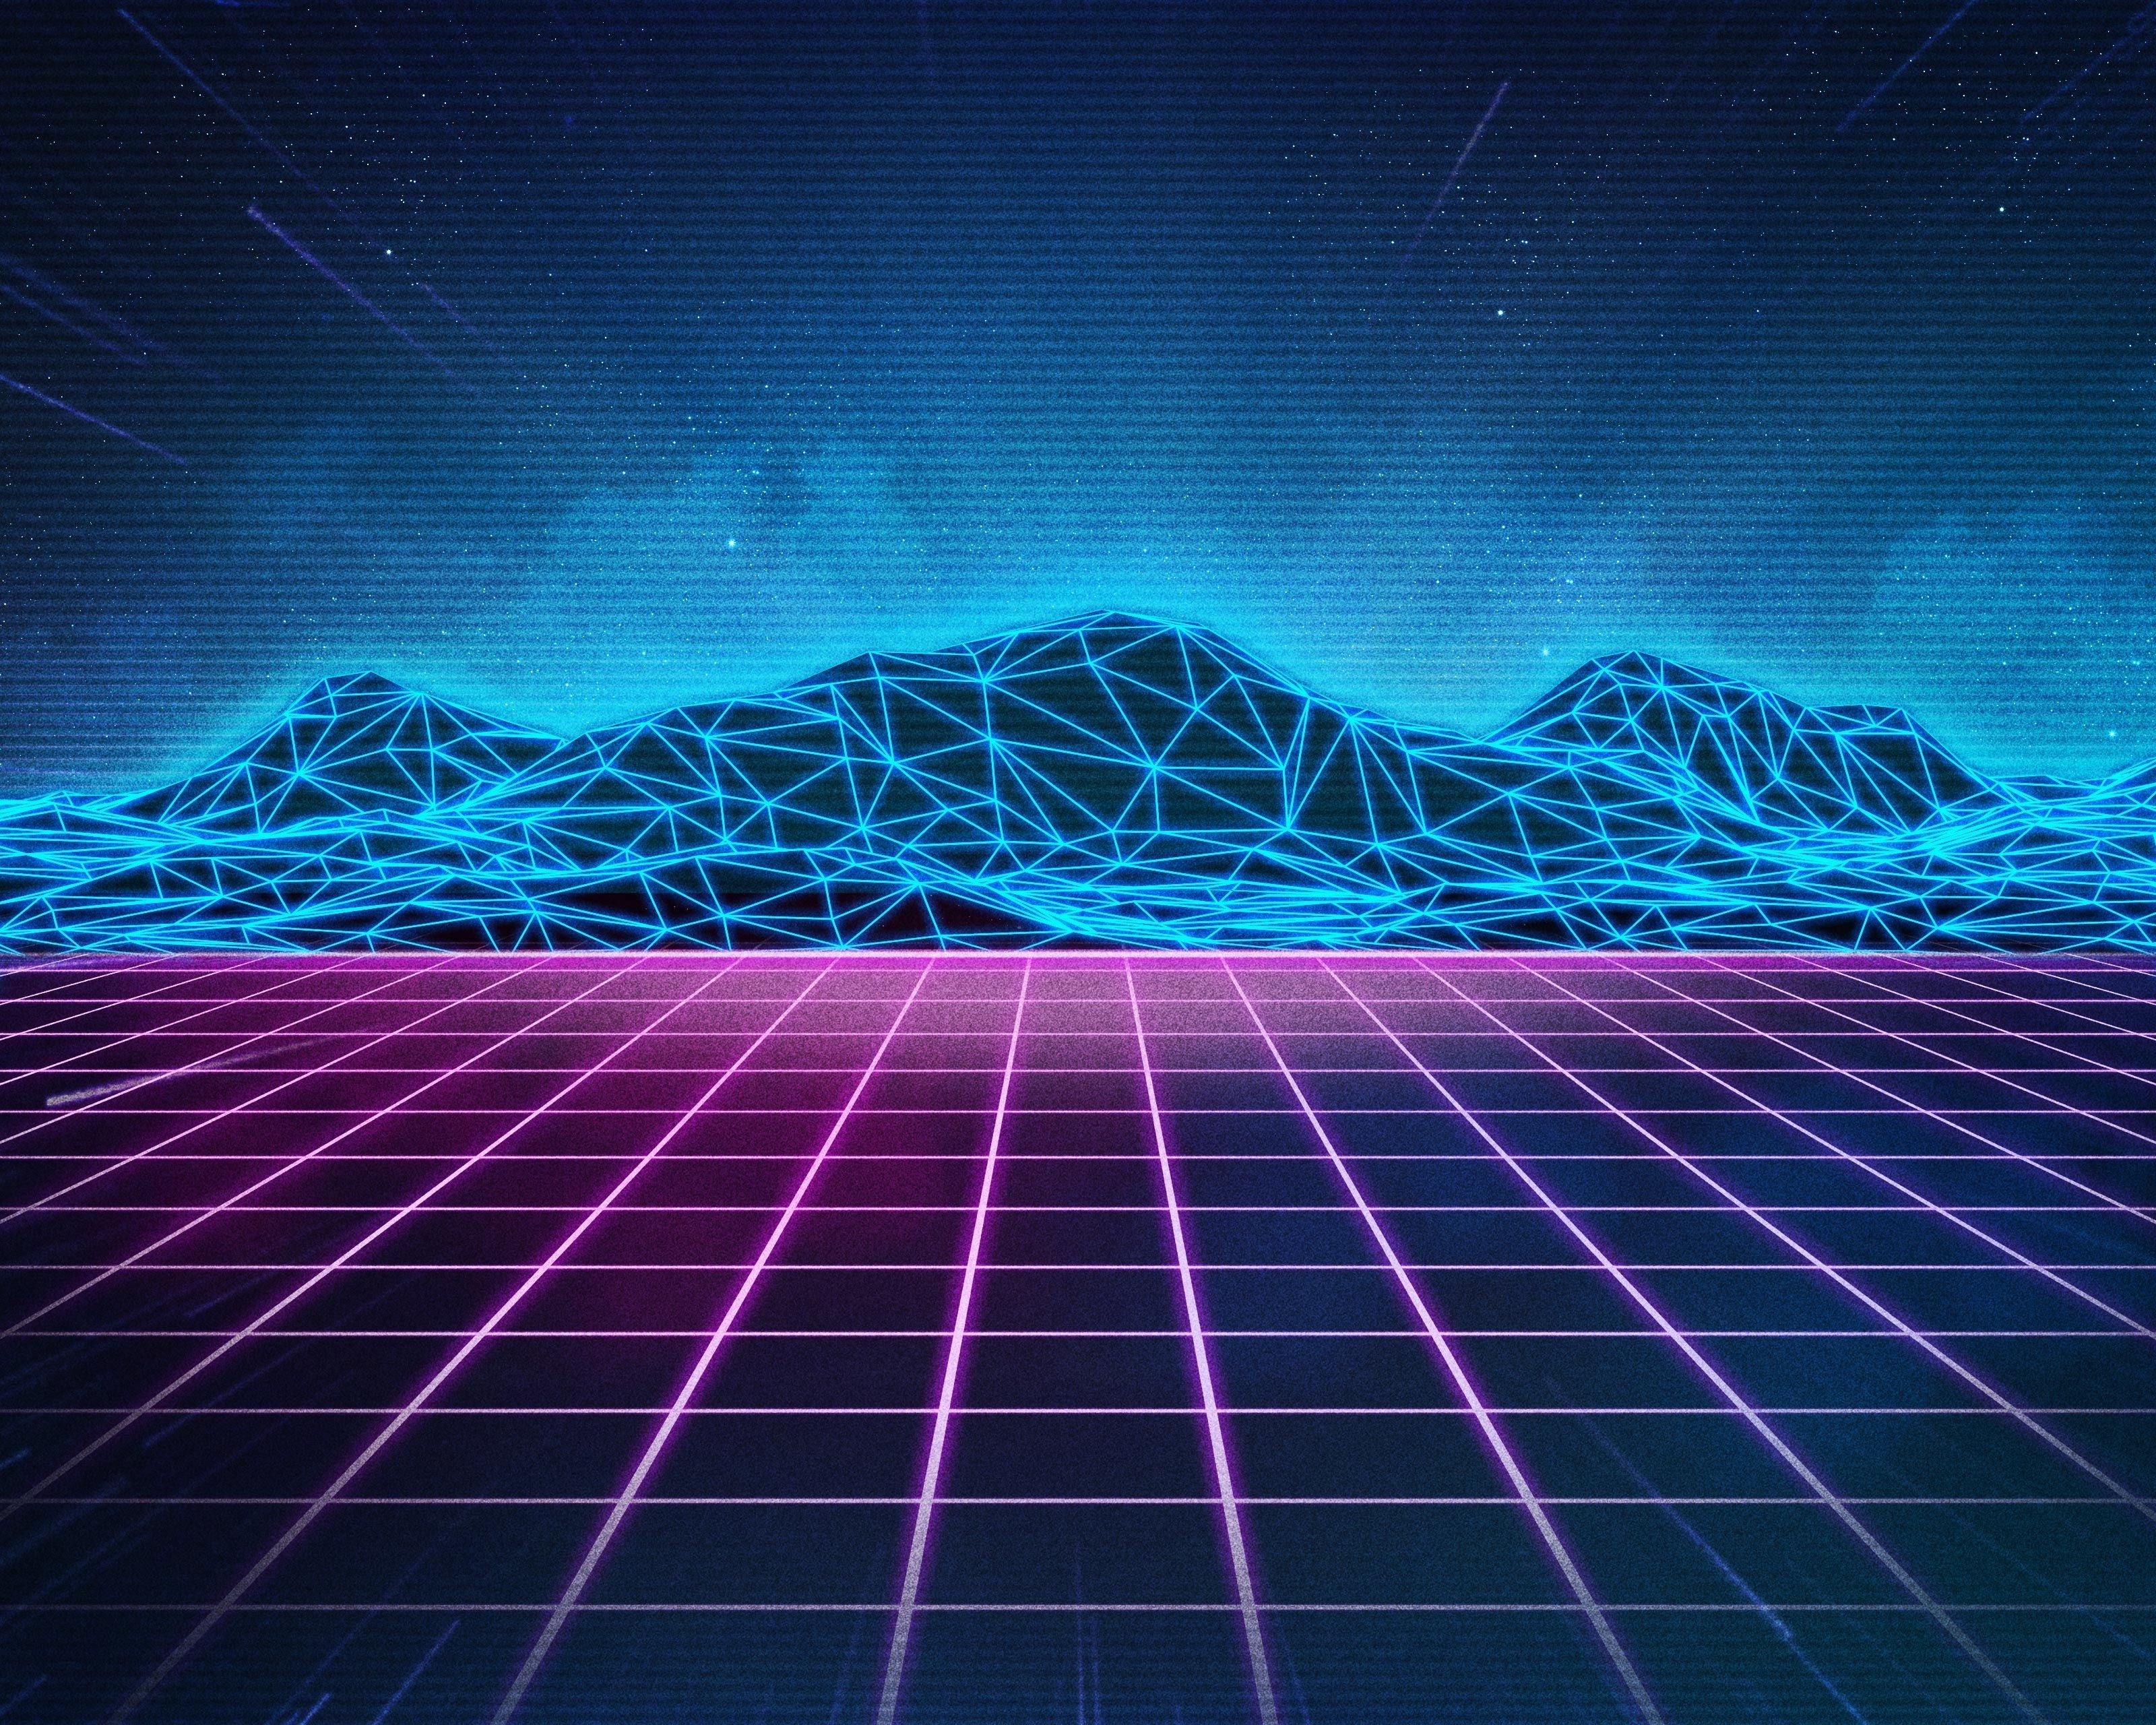 rad pack 80's-themed hd wallpapers â€“ nate wren â€“ graphic design